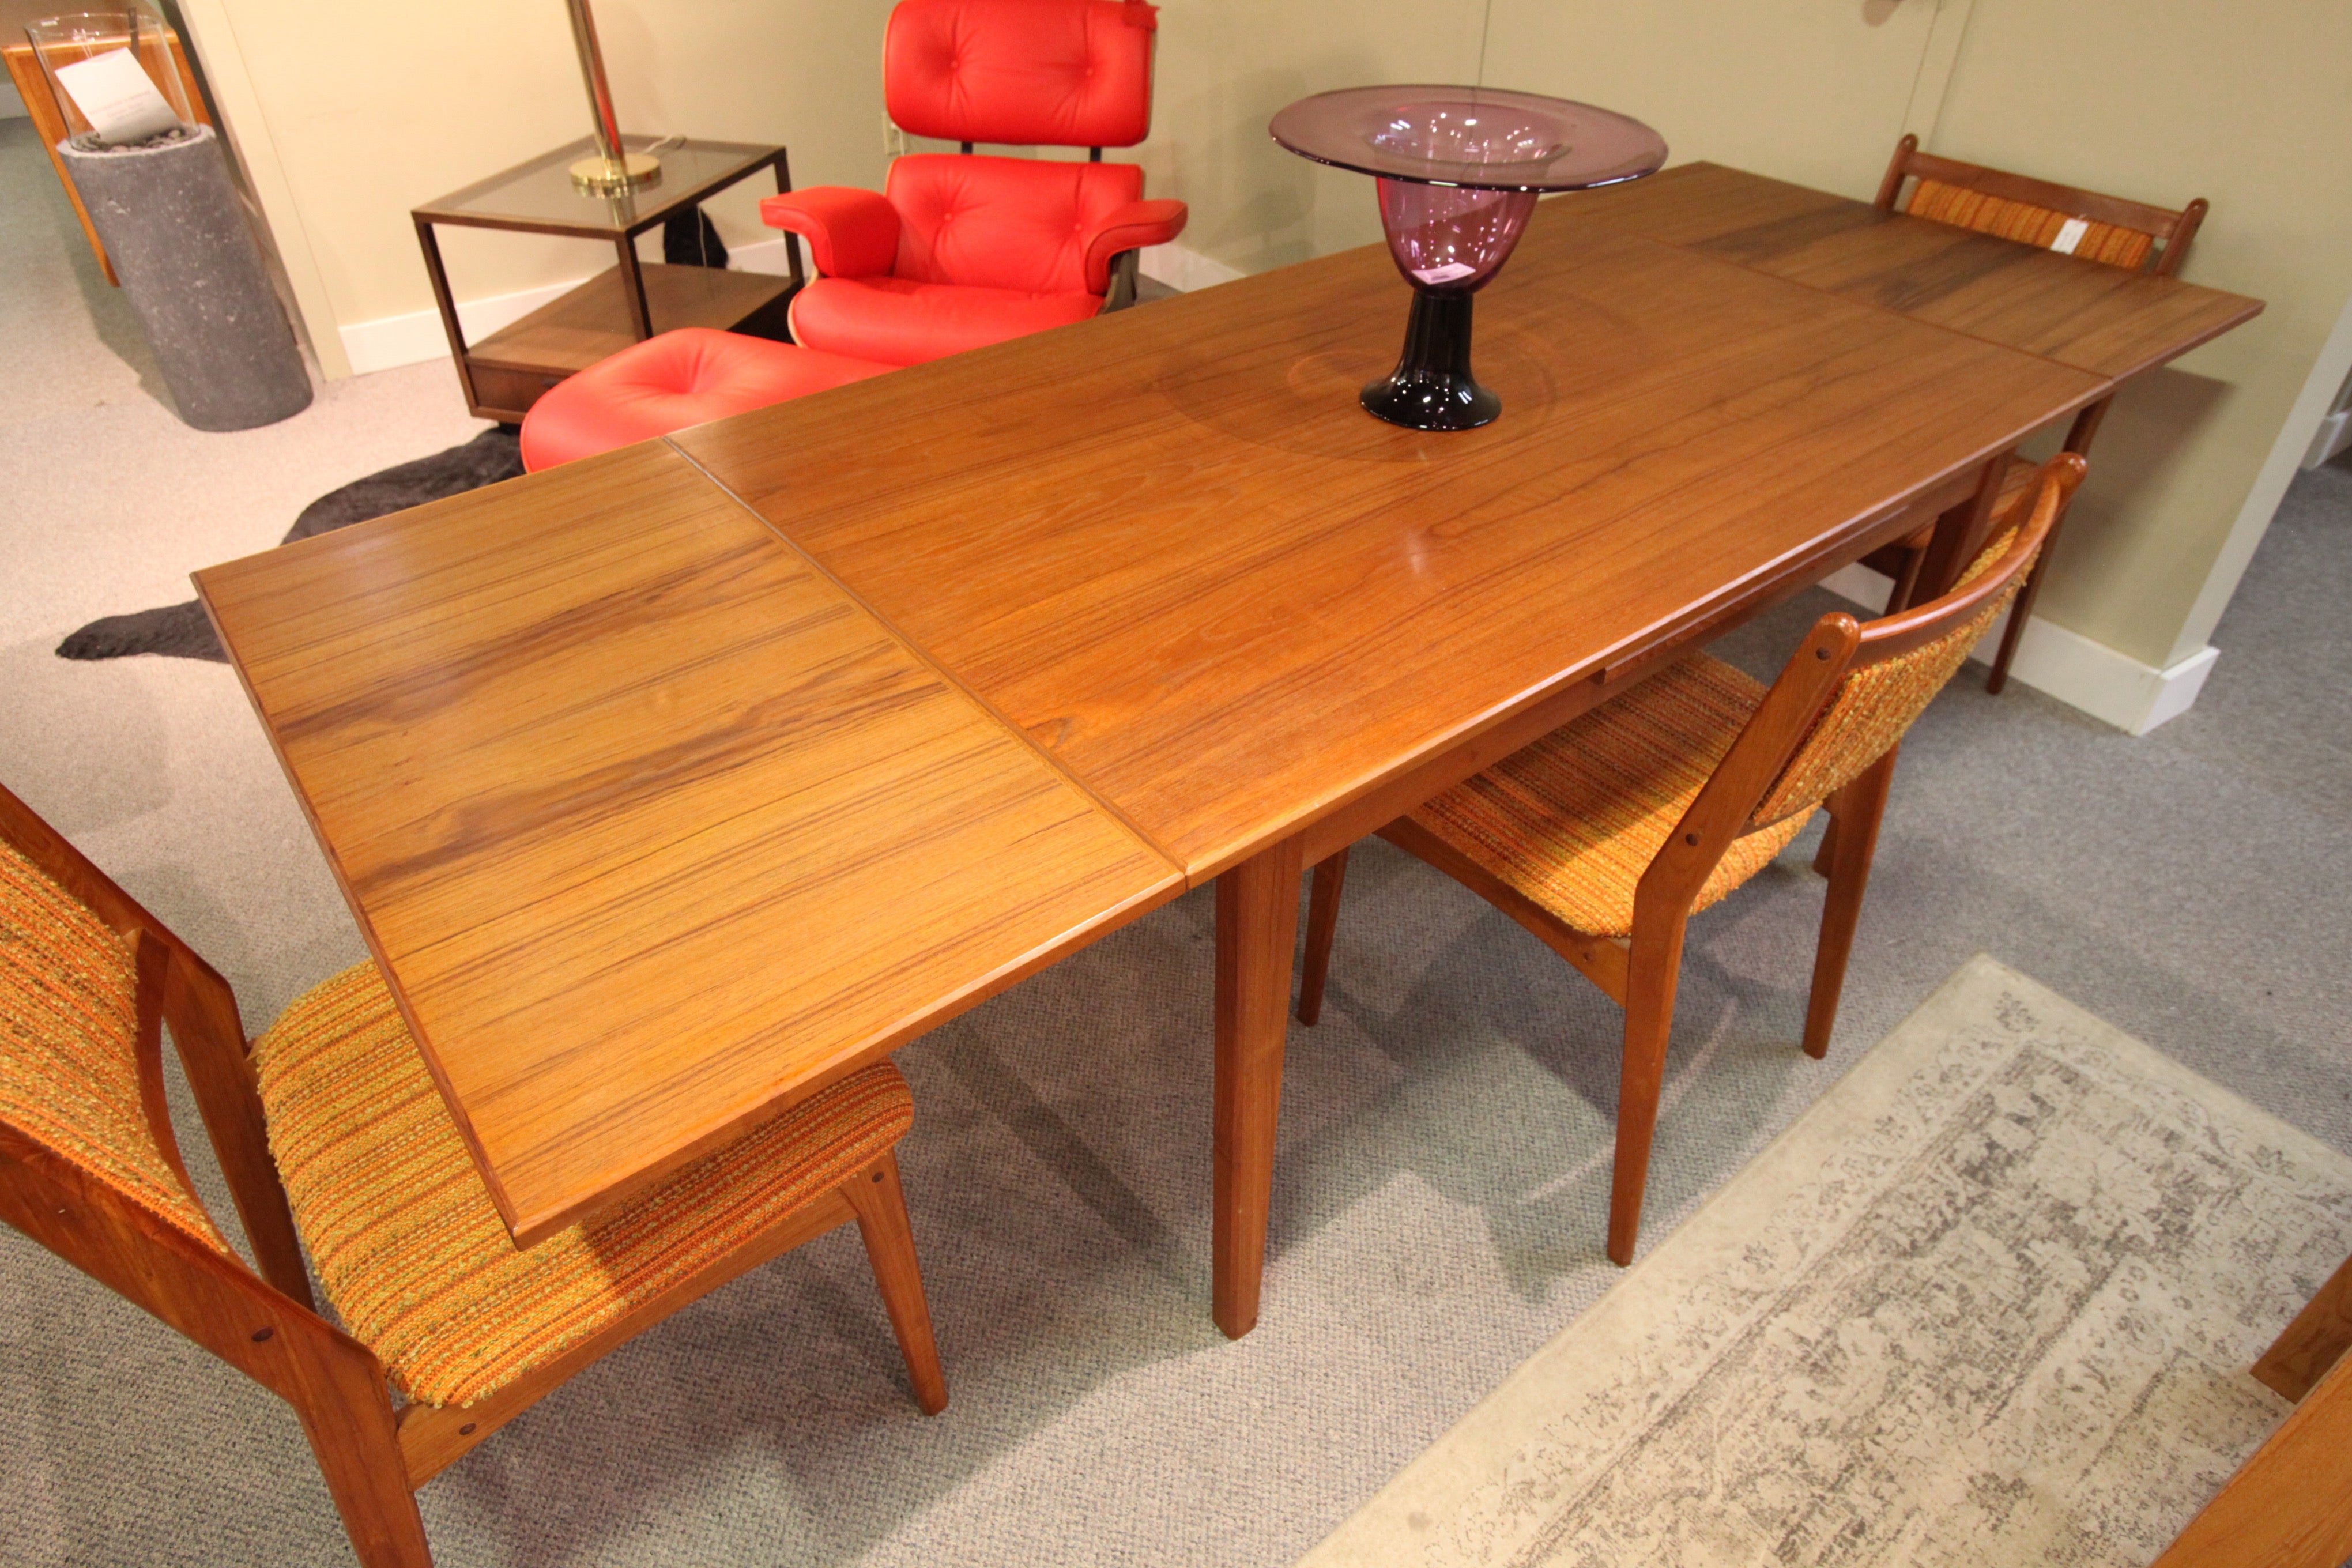 Teak Table with Extensions (54.5" x 34.5") or (89.5" x 34.5")